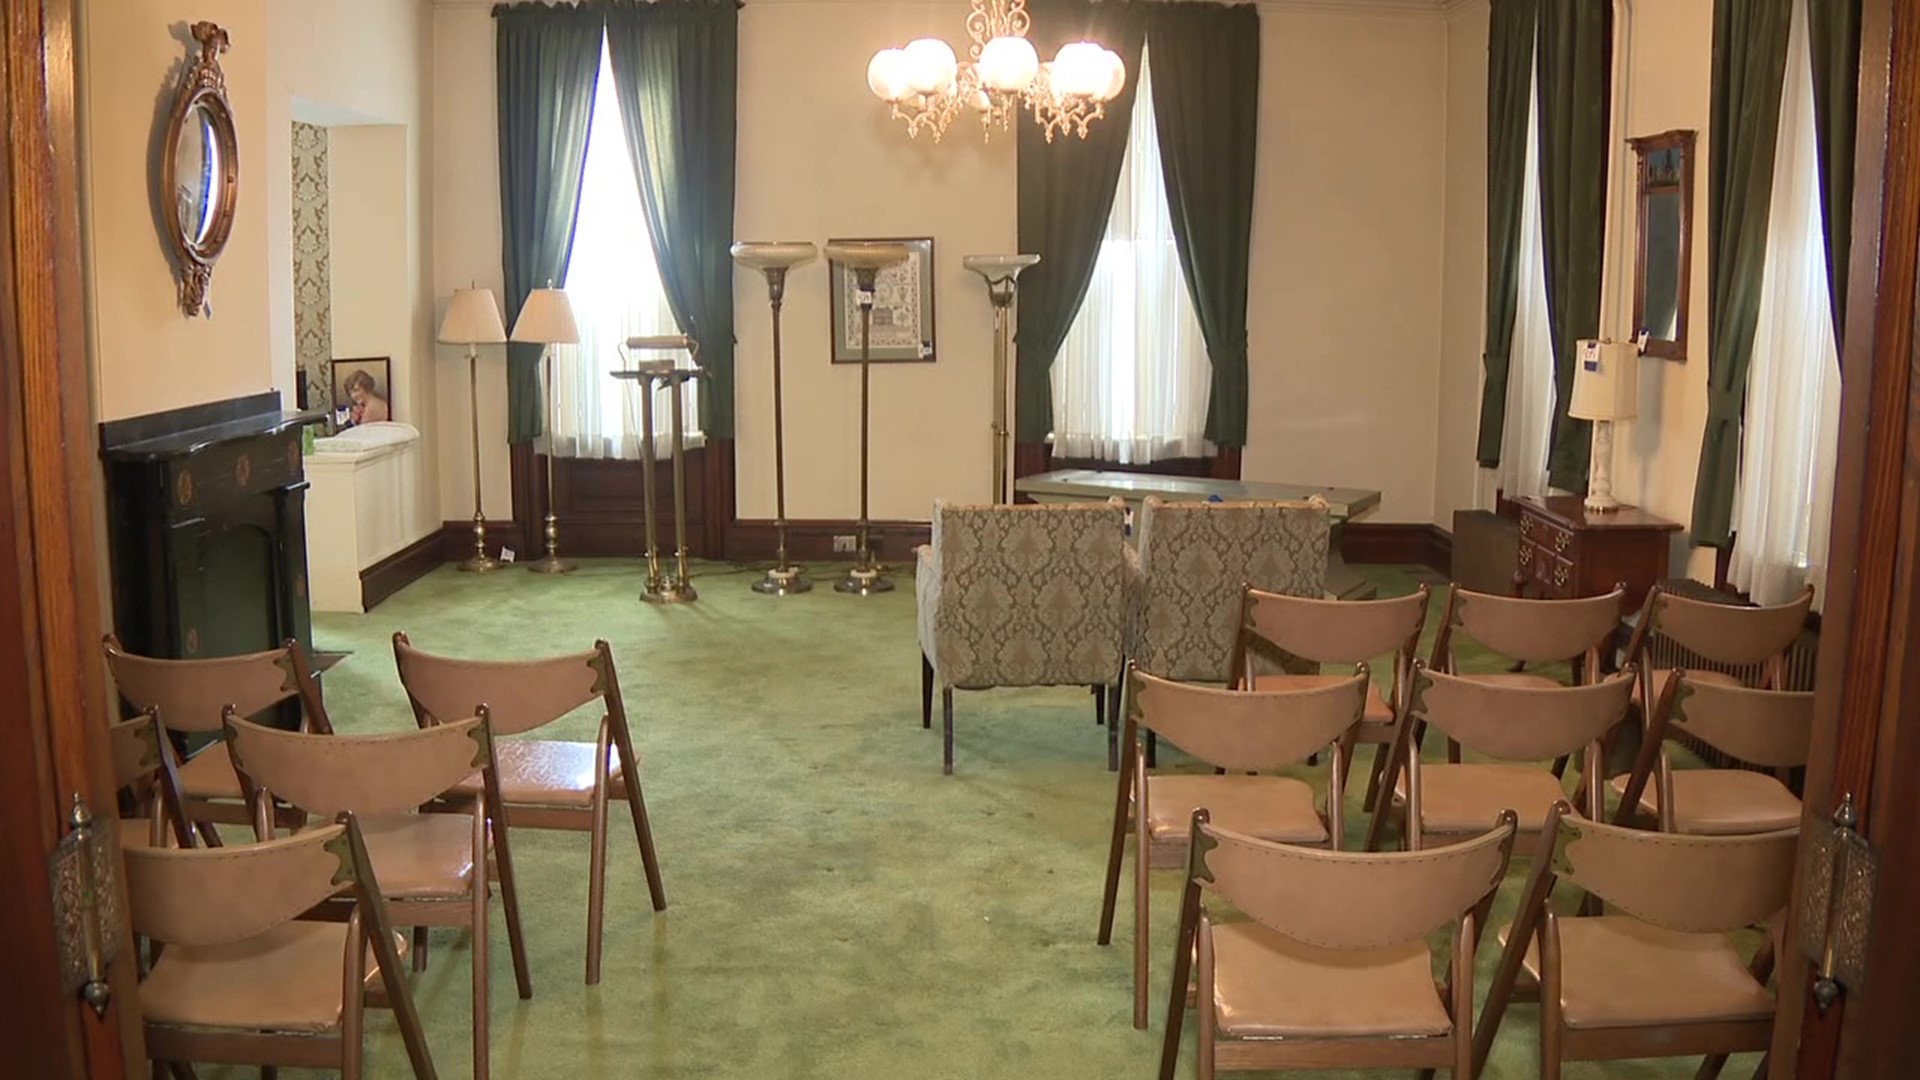 You can bid on items inside the former Jerry Wirt Blank Funeral Home.